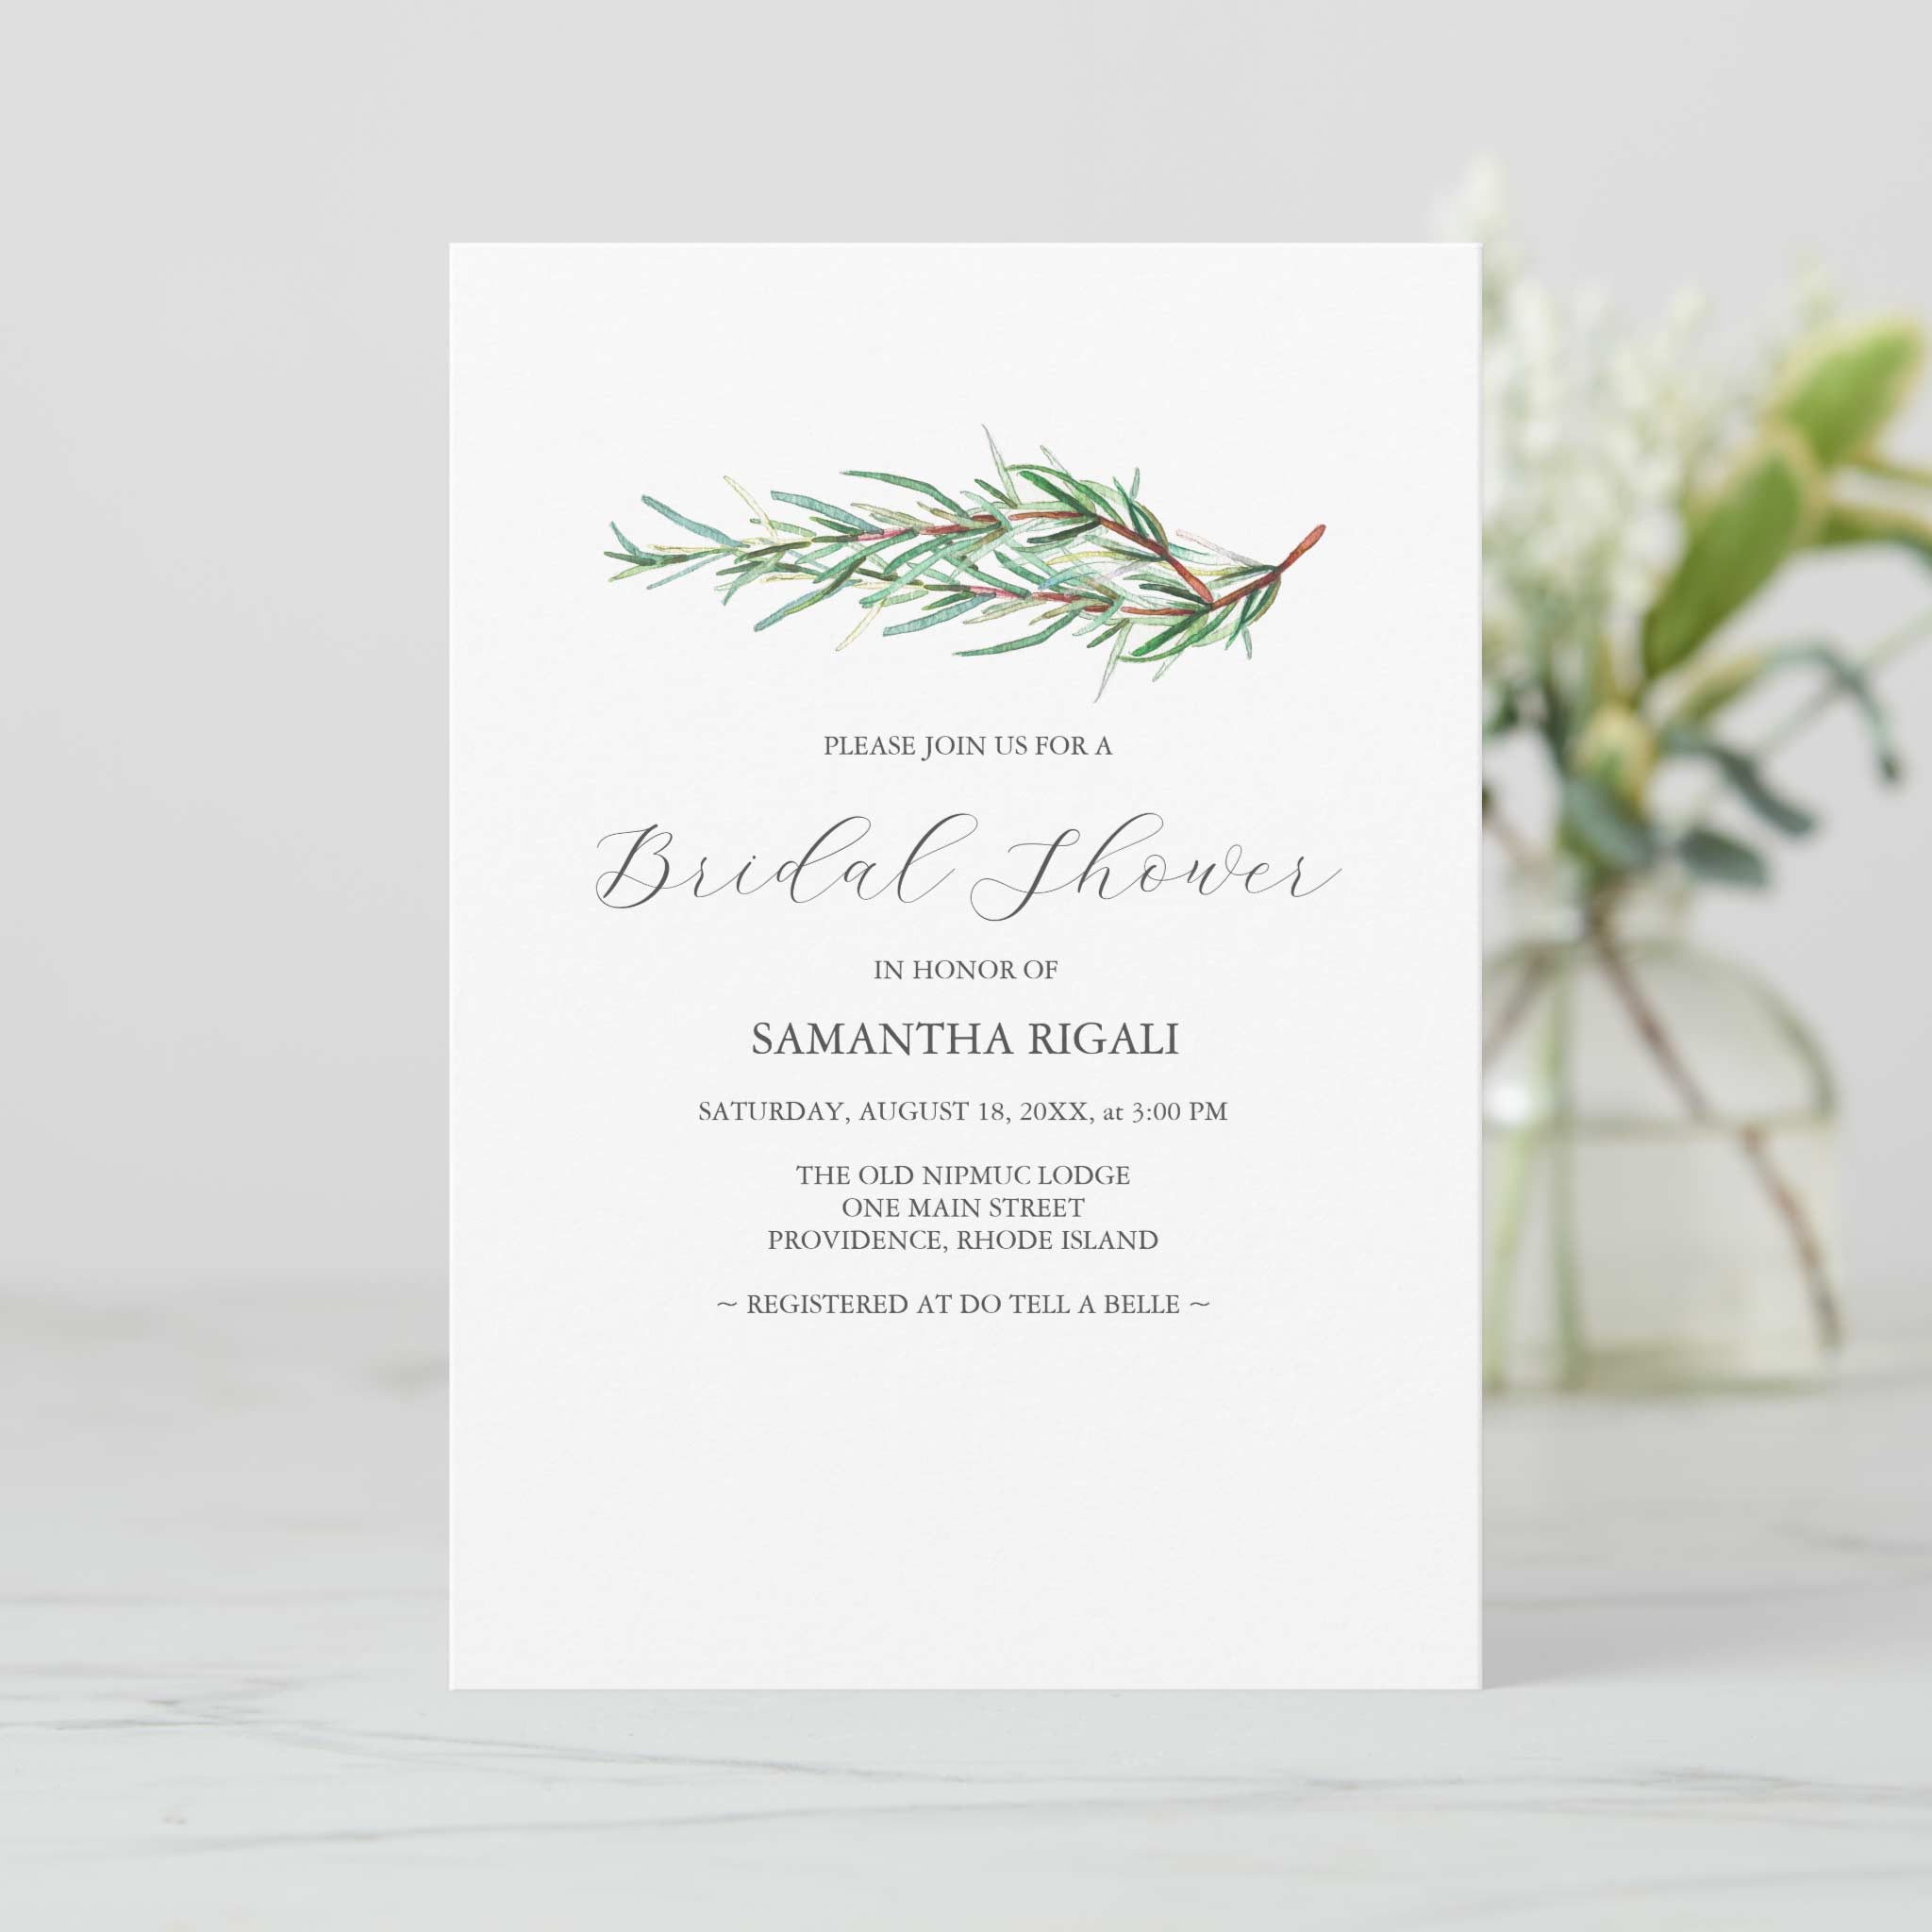 Bridal shower invitations feature rustic watercolor rosemary art. Click to shop.